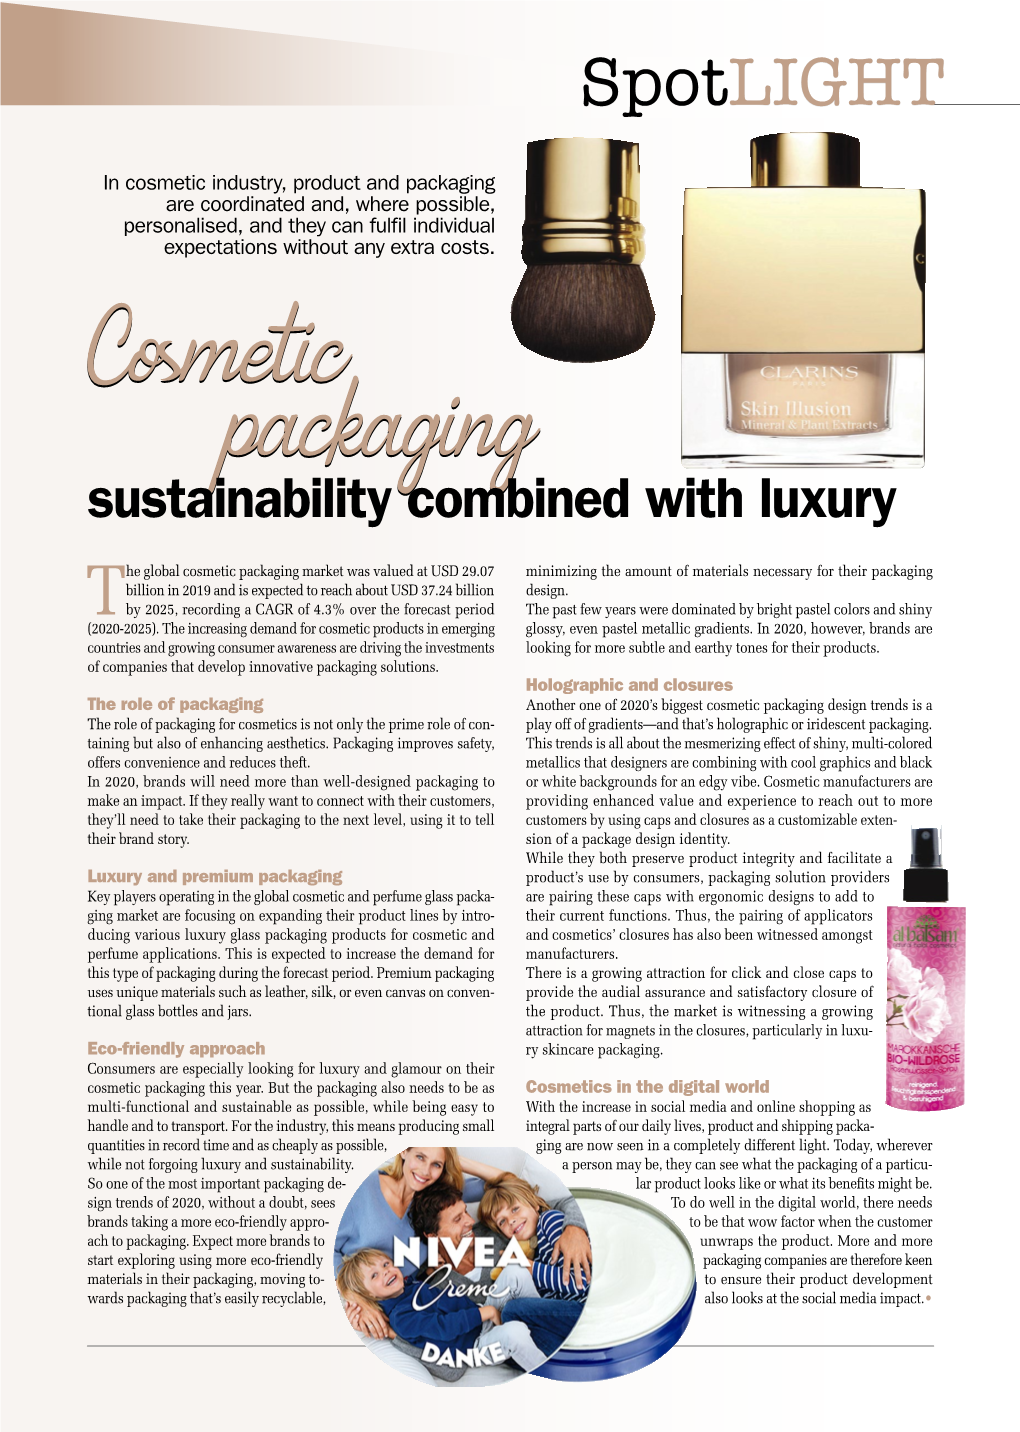 Cosmetic Packaging Sustainability Combined with Luxury